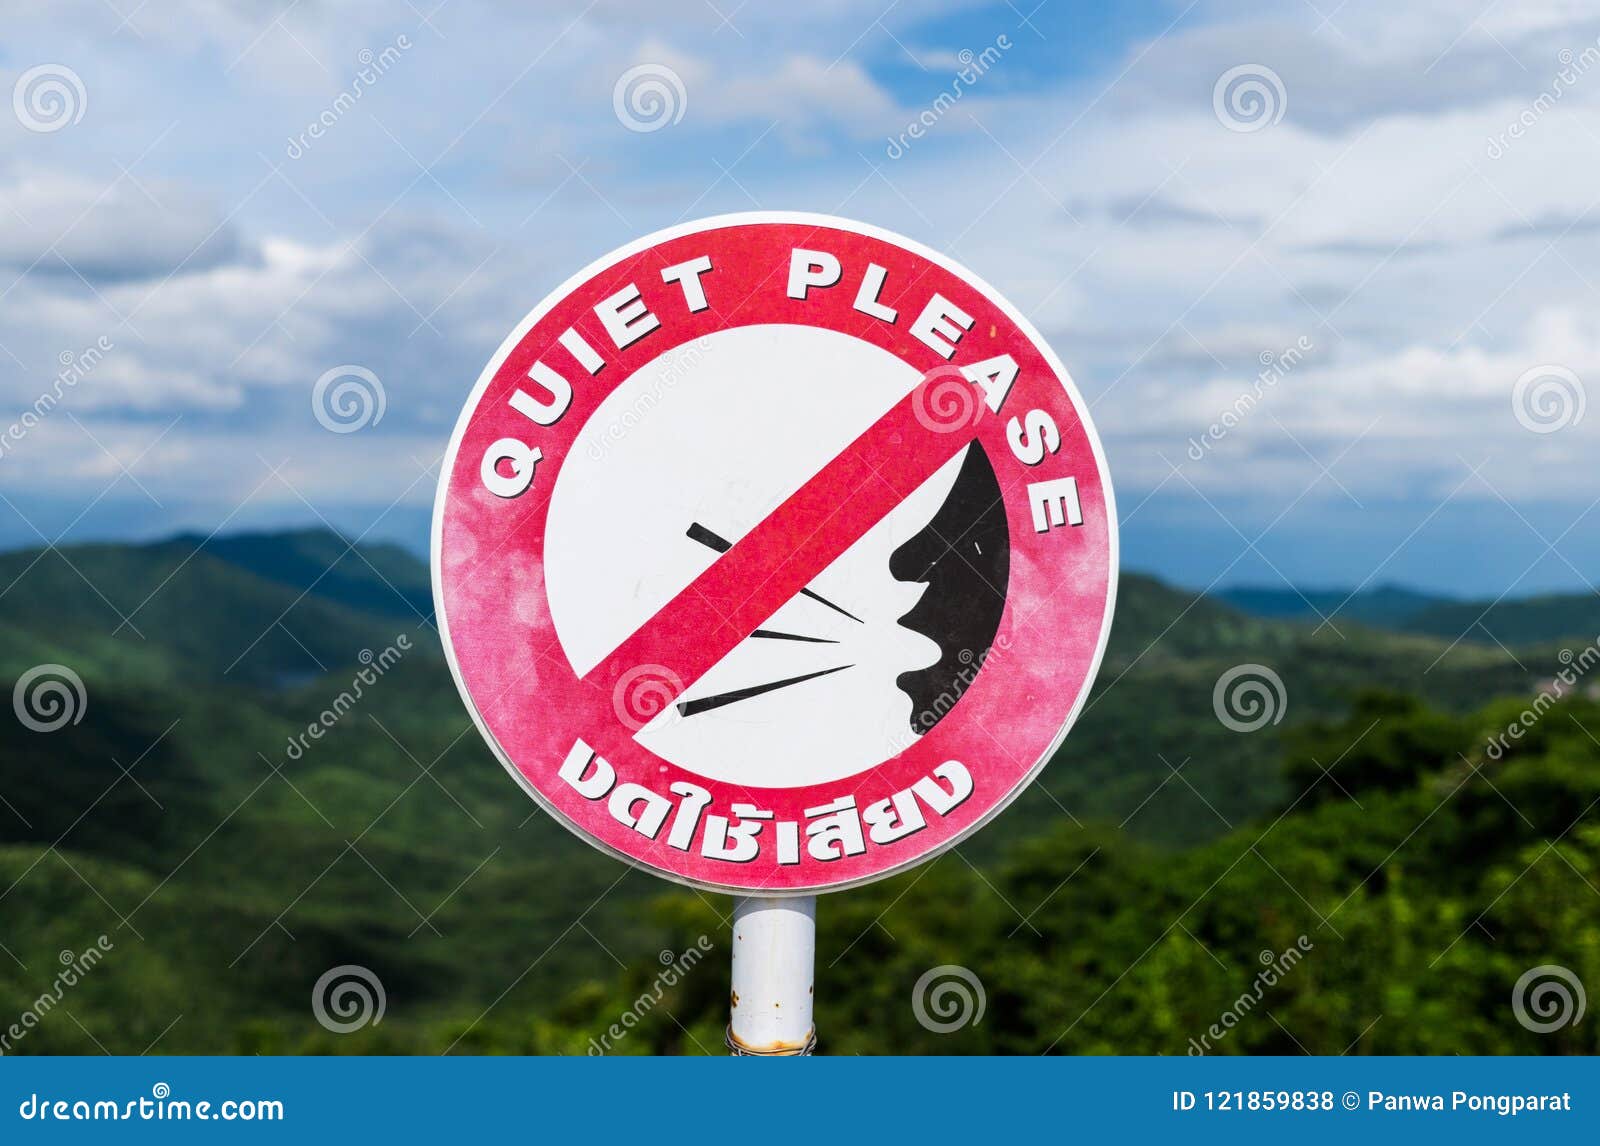 Quiet Please Sign Stock Images - Download 471 Royalty Free ...